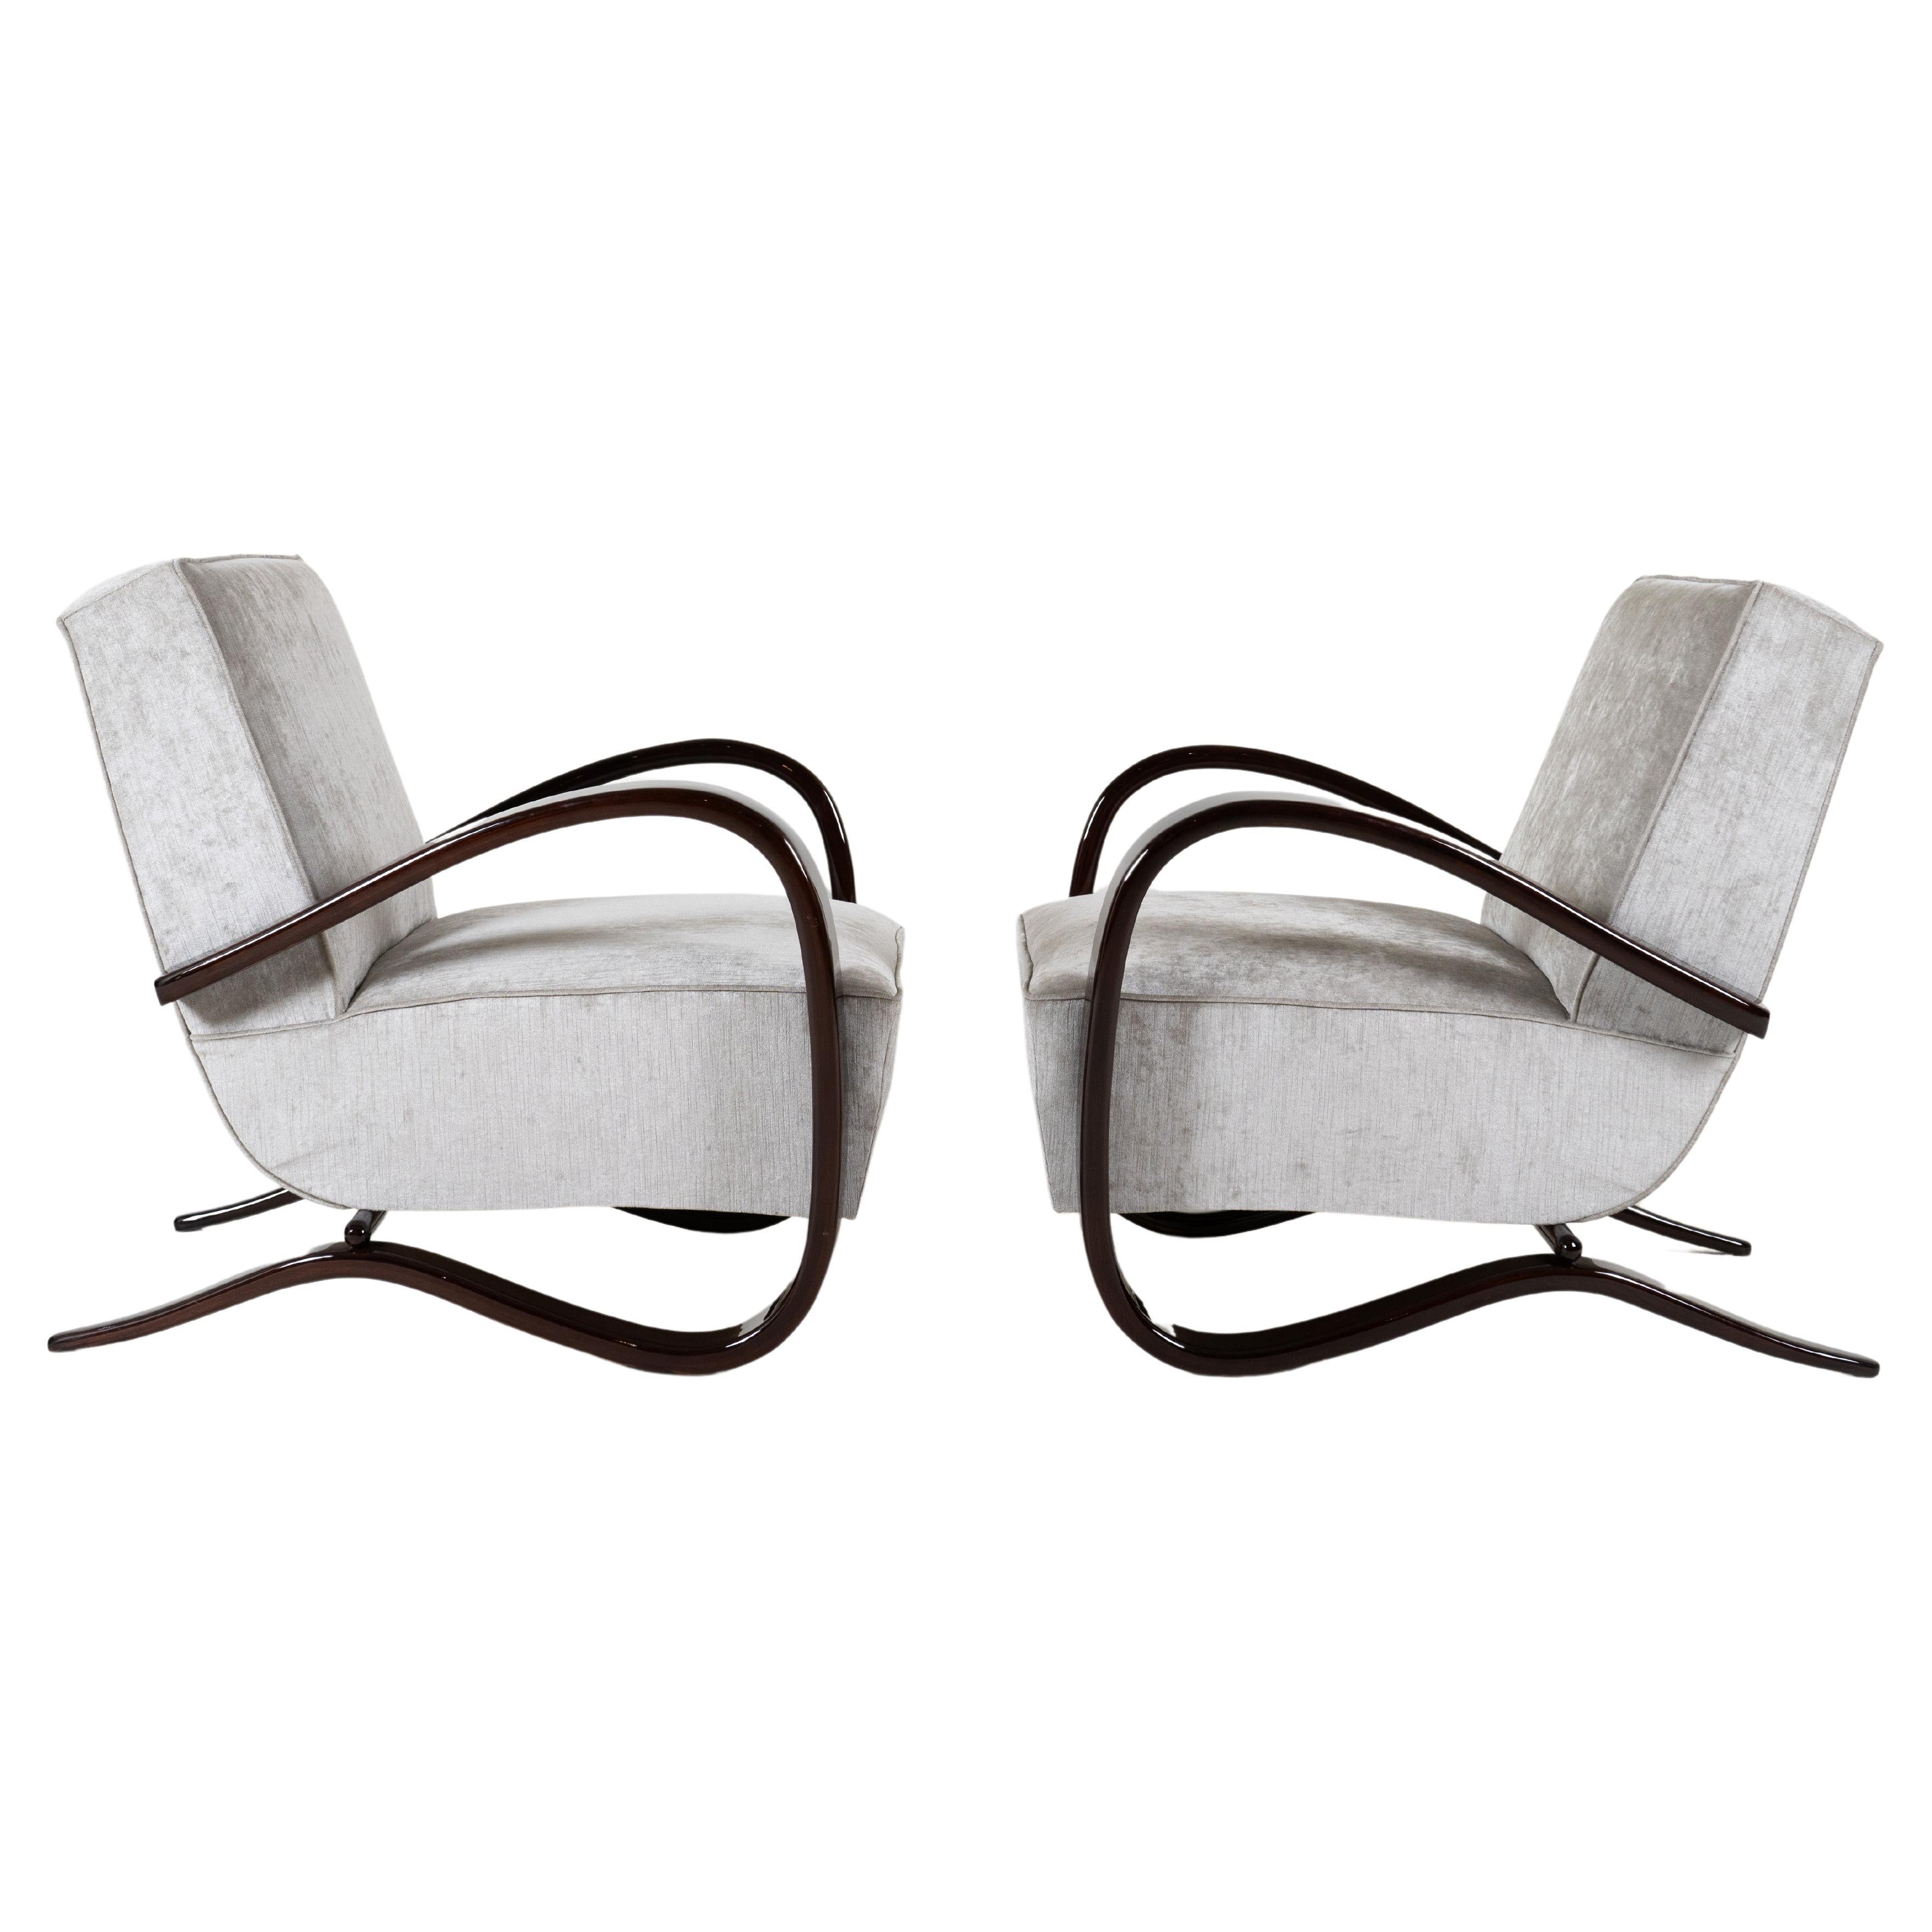 A Pair of Armchairs in the style of Halabala